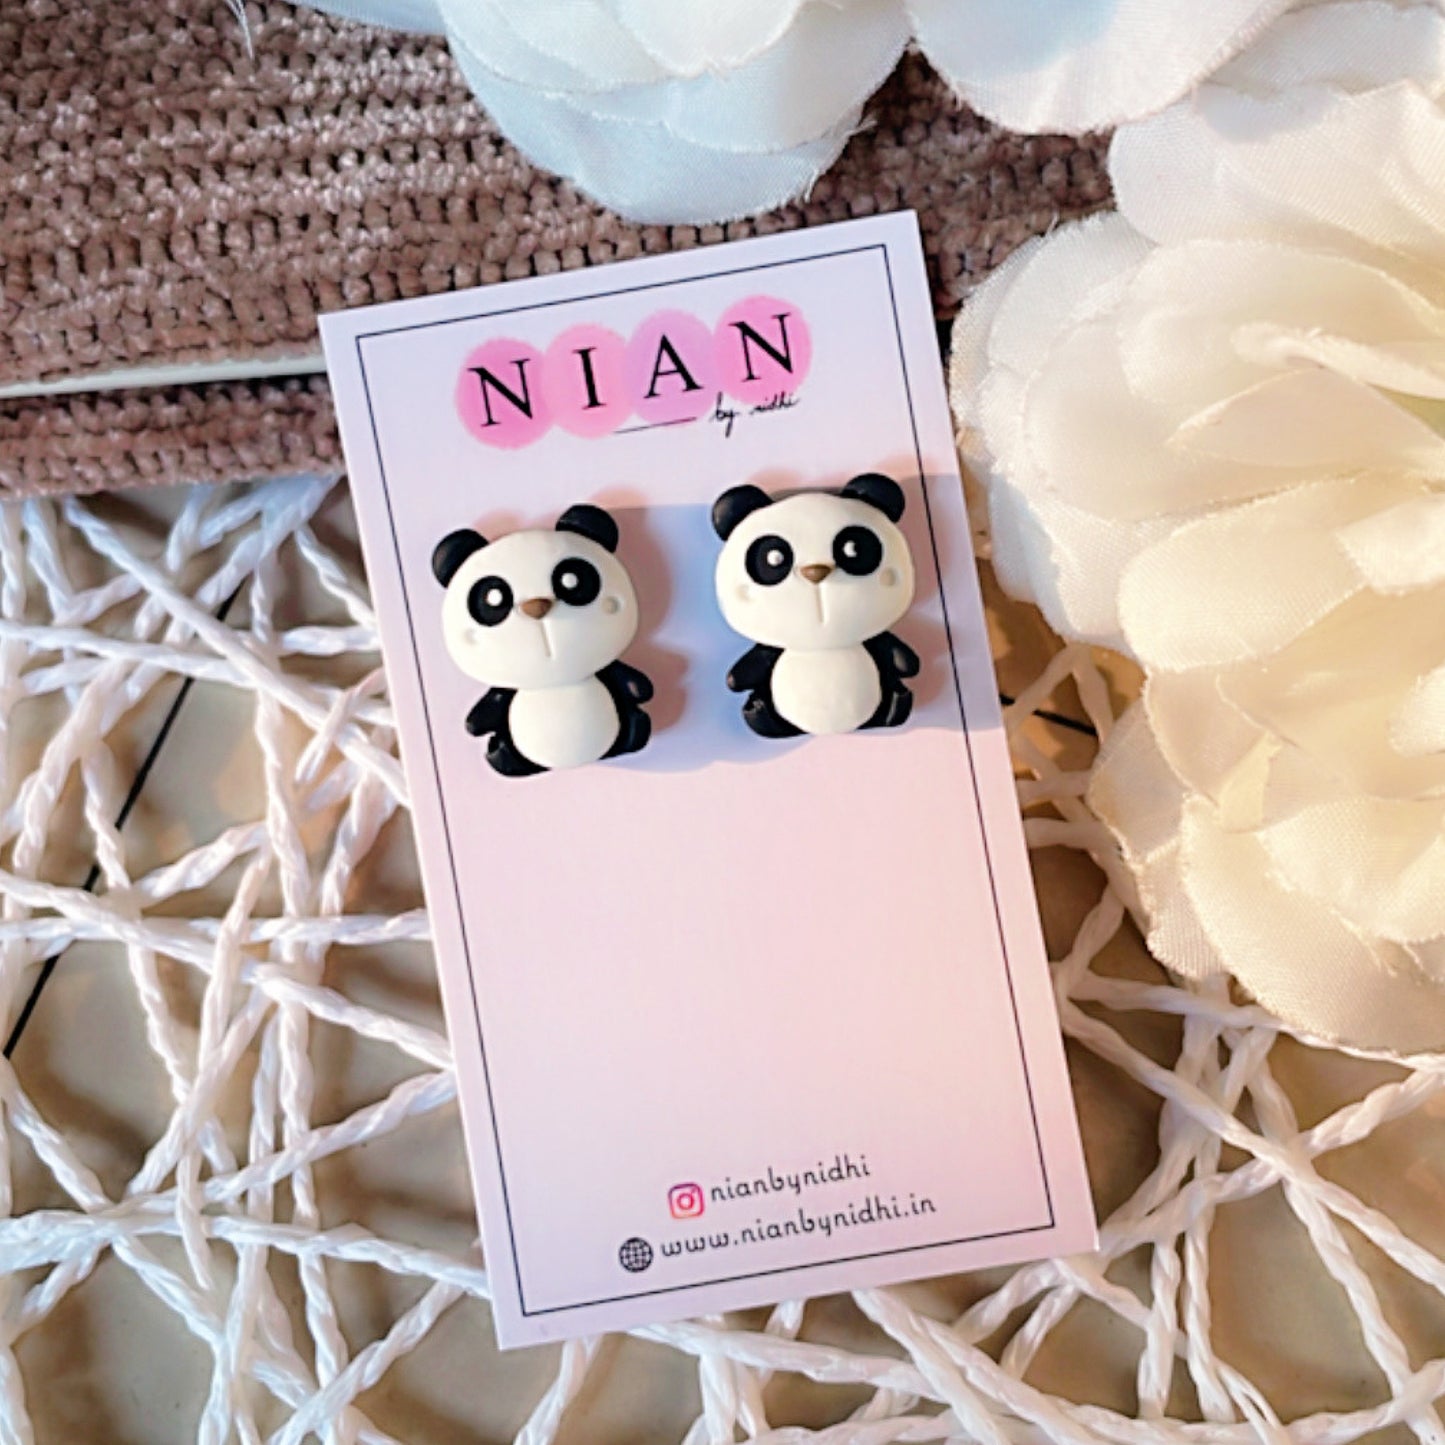 Perky Panda Studs - White and Black - Nian by Nidhi - placed in a white background